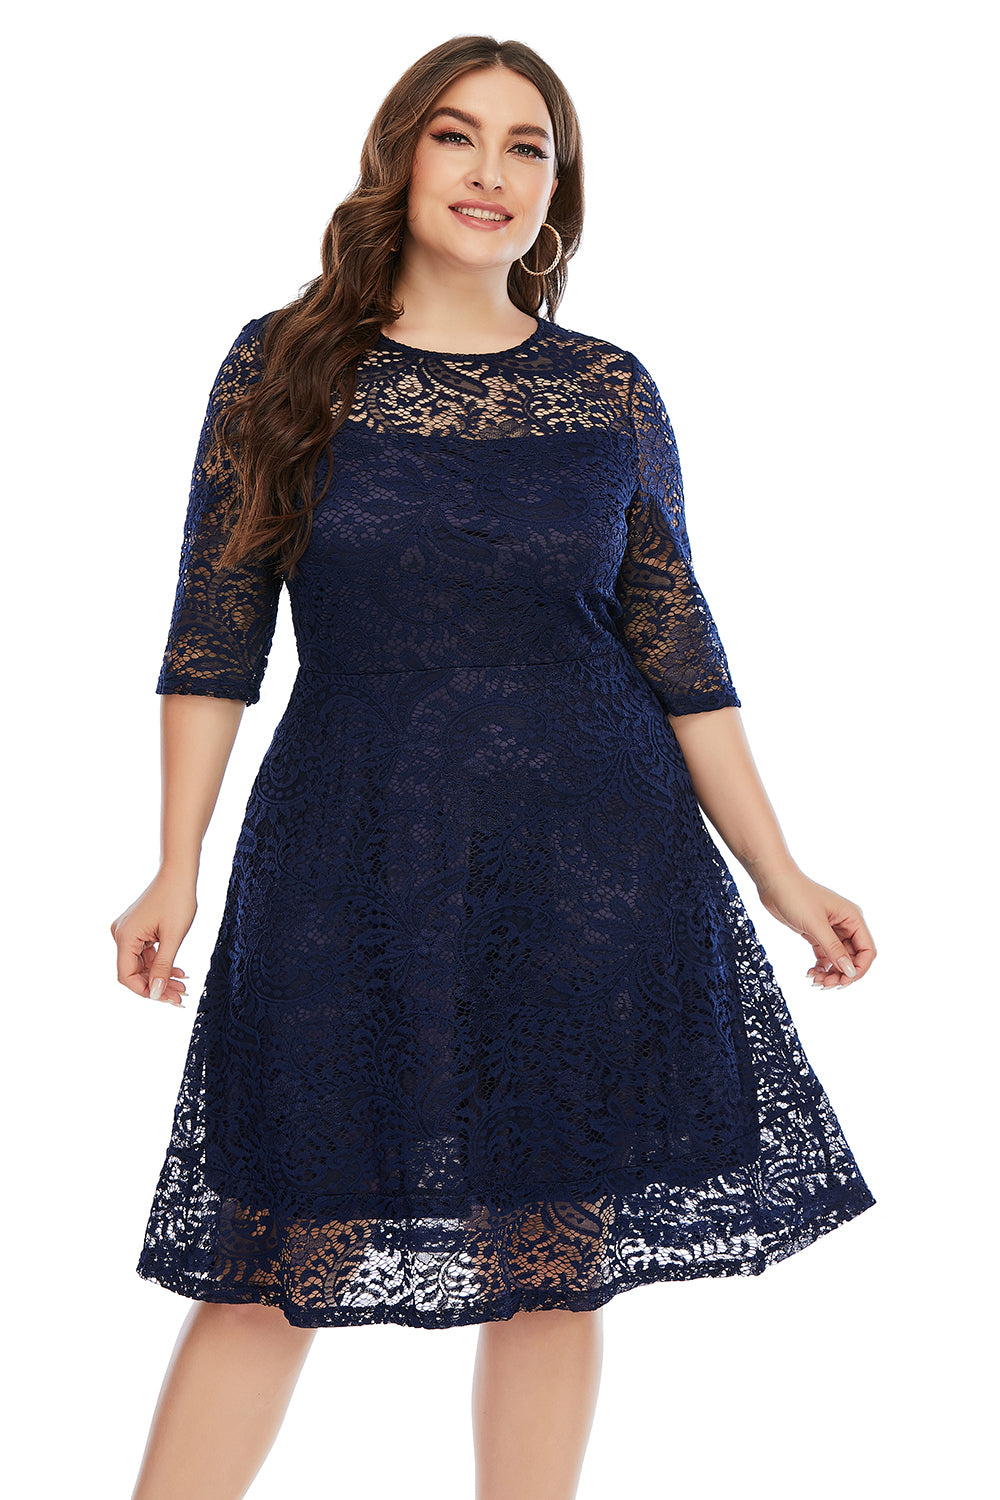 Plus Size Lace Party Dress with Half Sleeves